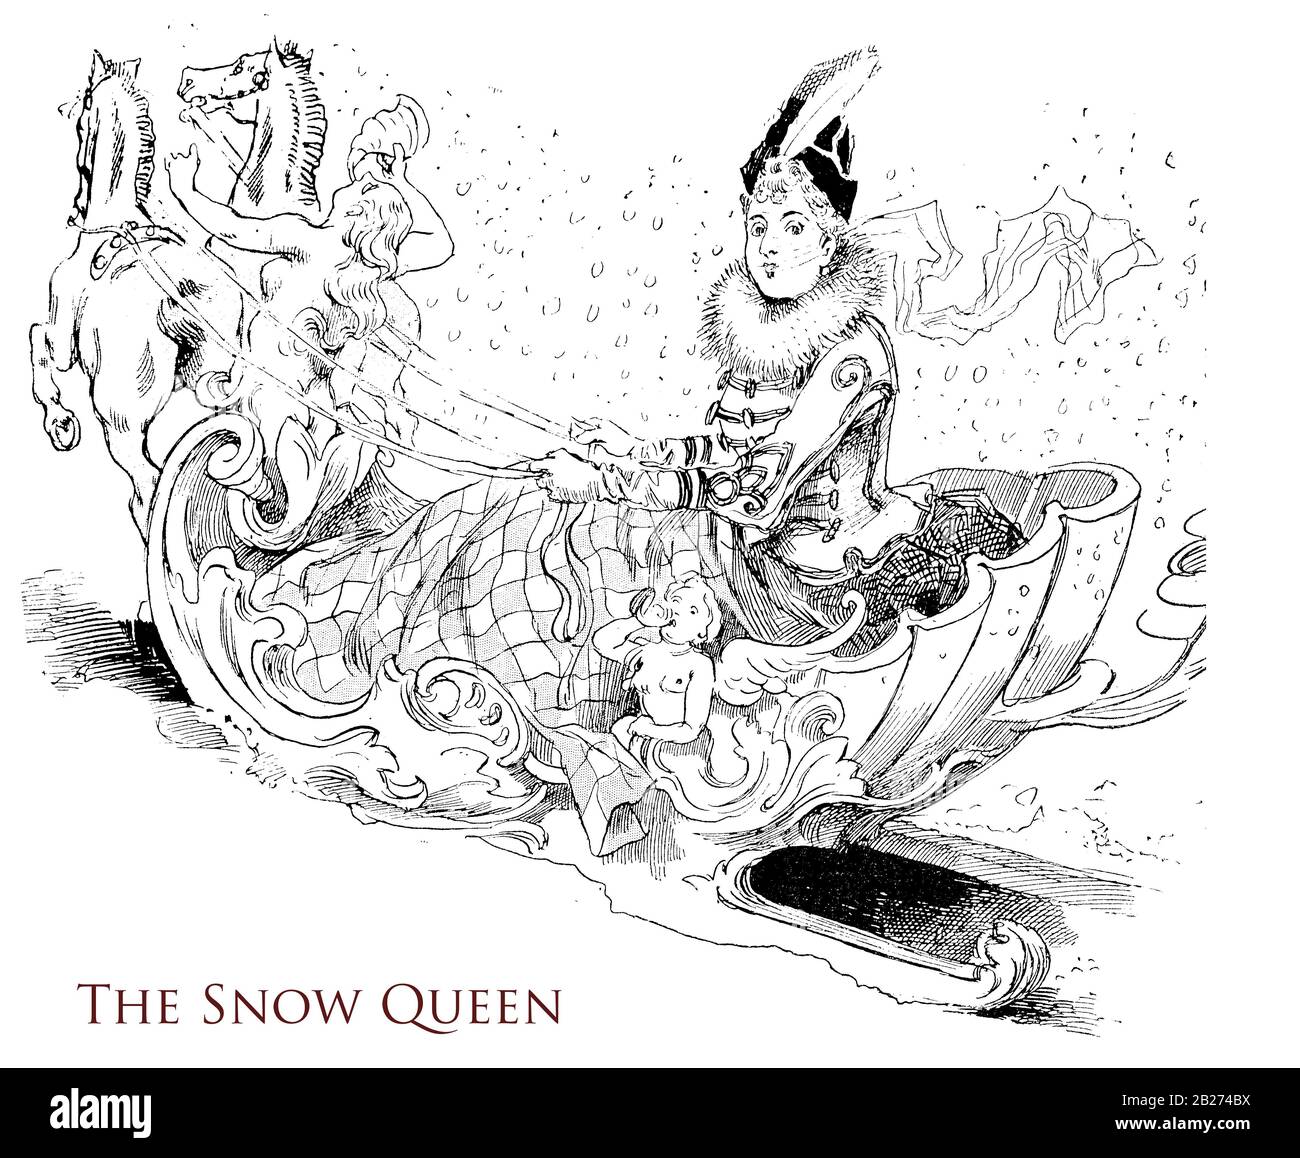 French humor and caricature: the snow queen, fashionable lady drives a horse-drawn hyper decorated sleight with a fancy costume under a snowfall Stock Photo